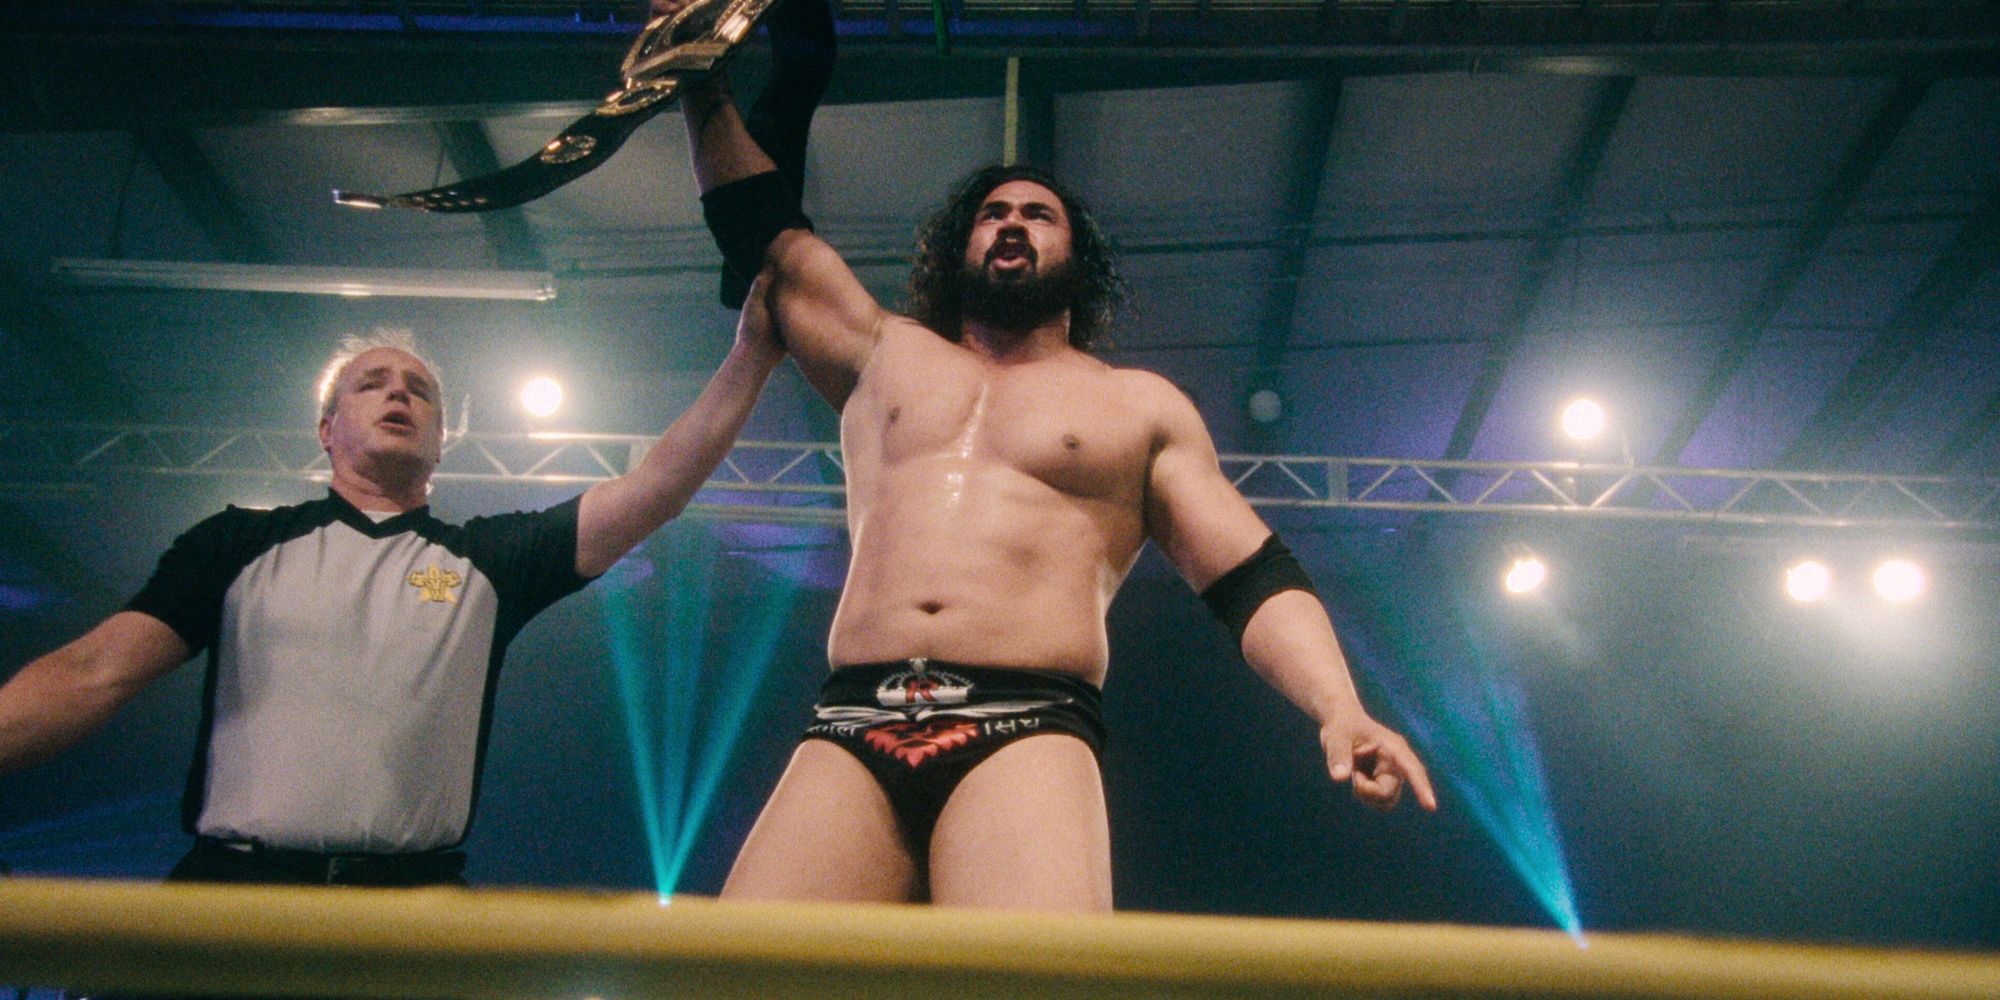 Mahabali Shera lifting his championship belt with a referee in the ring in the Netflix documentary series Wrestlers